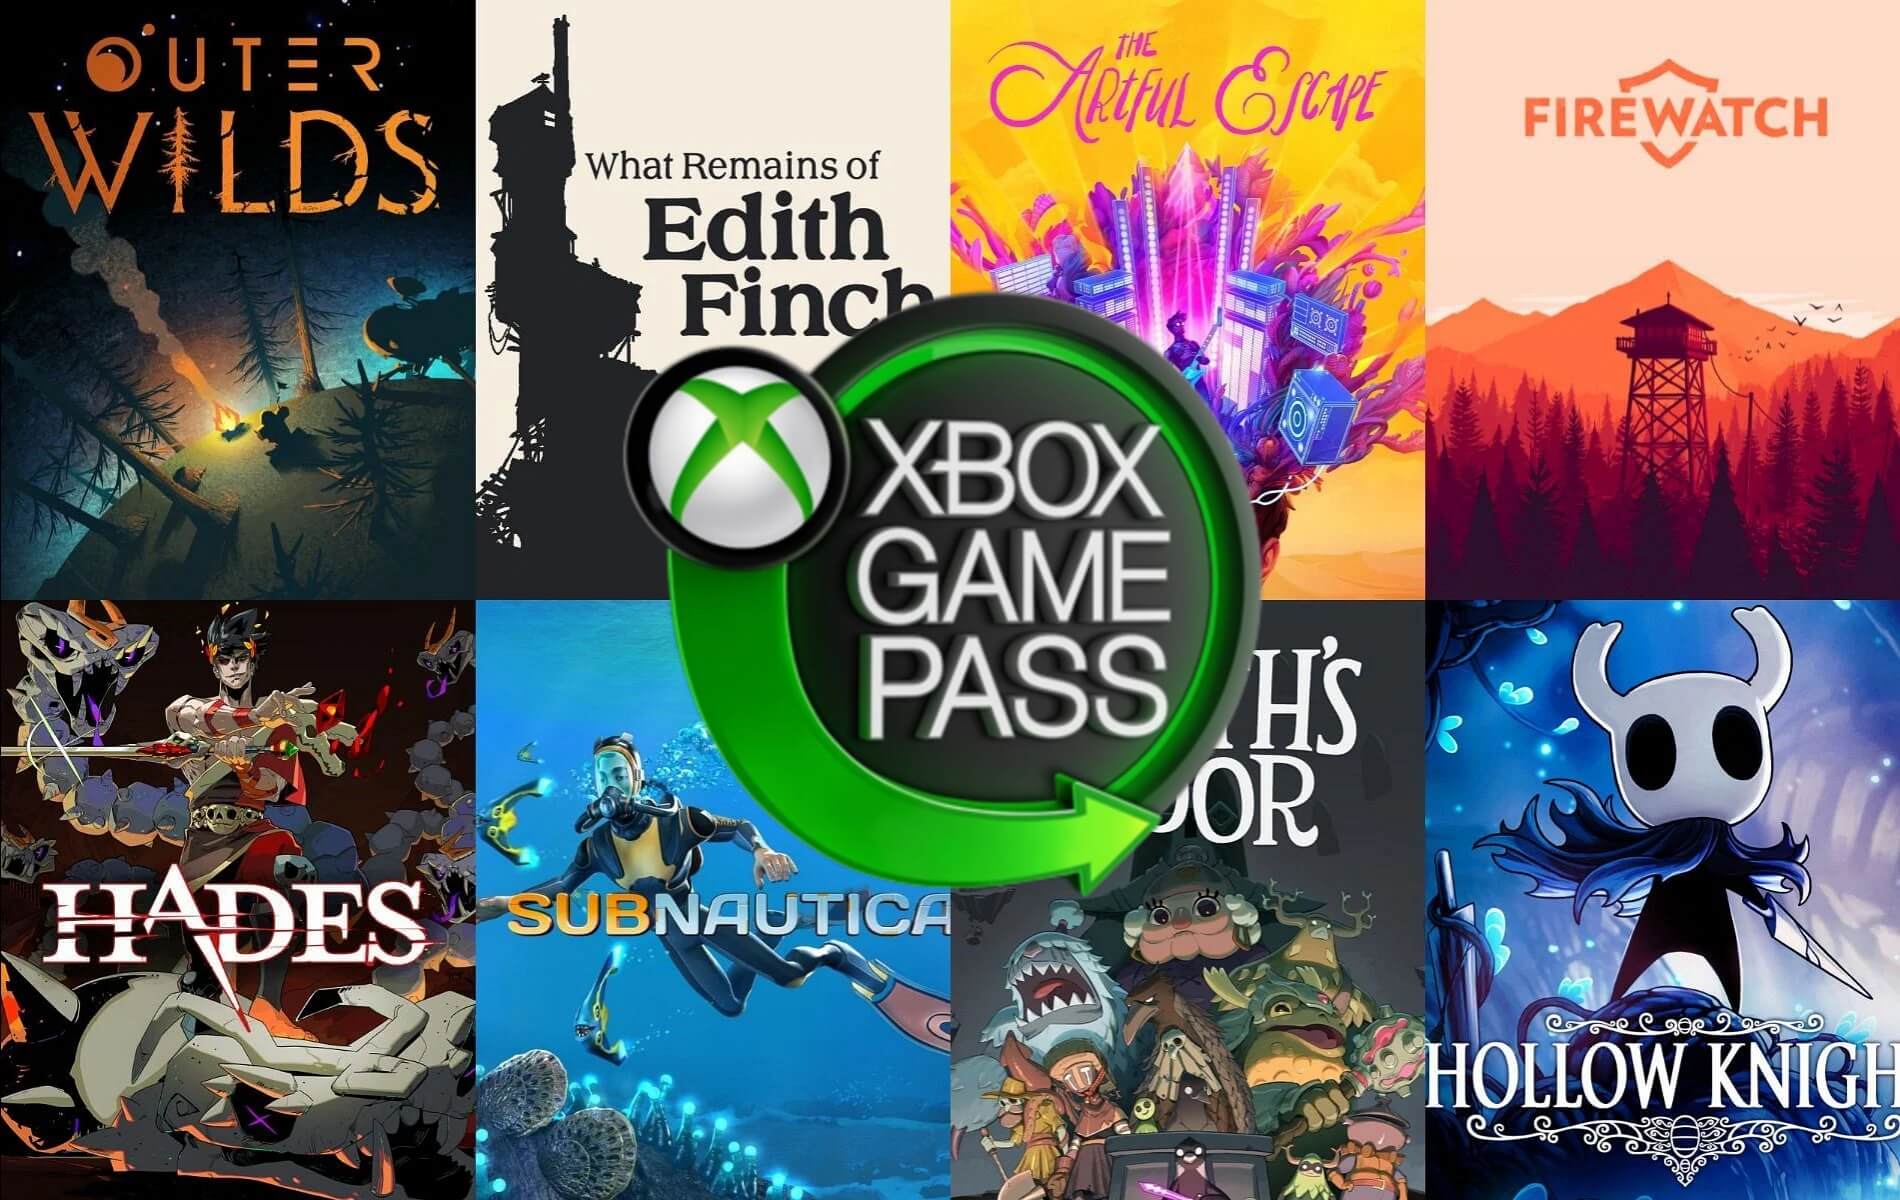 Game Pass is a blessing for Indie games, but it seems Unity's about to negate that